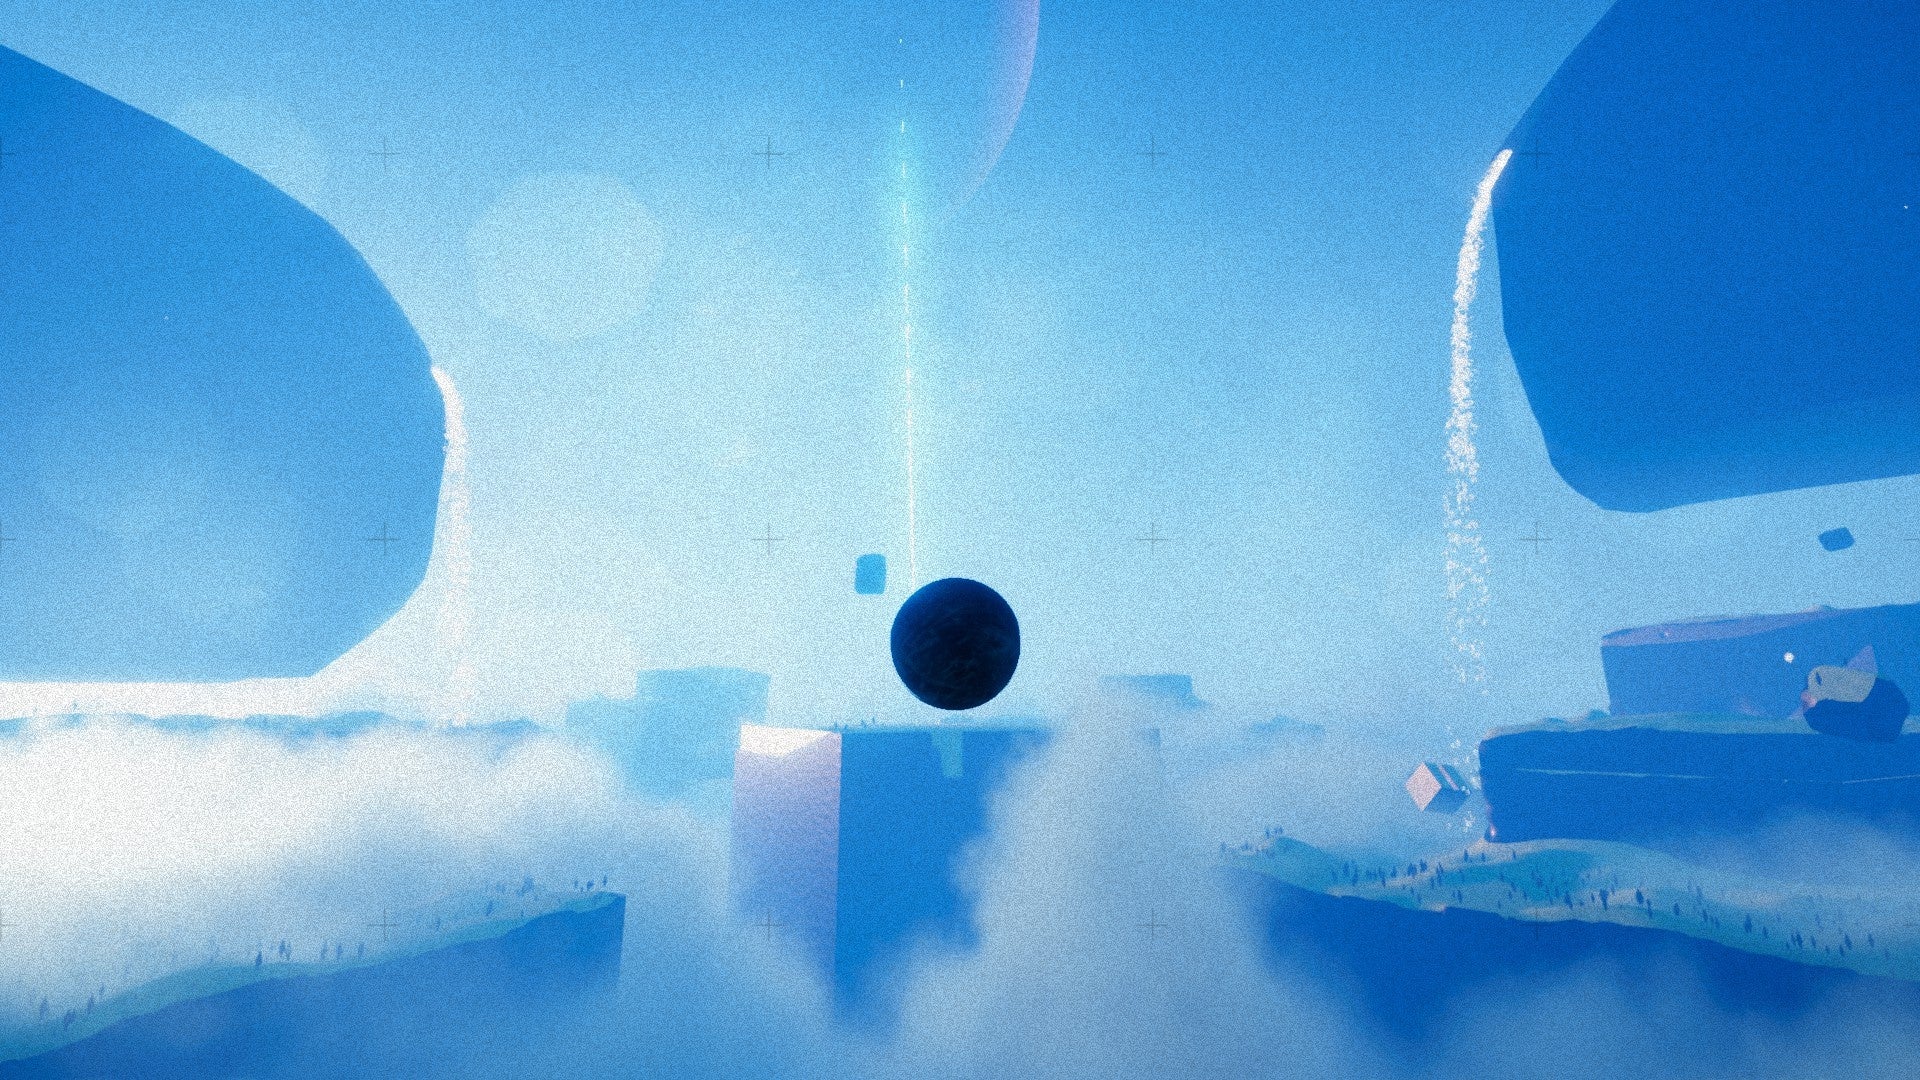 An Exo One screenshot showing a dark ball, seemingly floating in place, surrounded by misty blue skies and what appear to be floating islands.